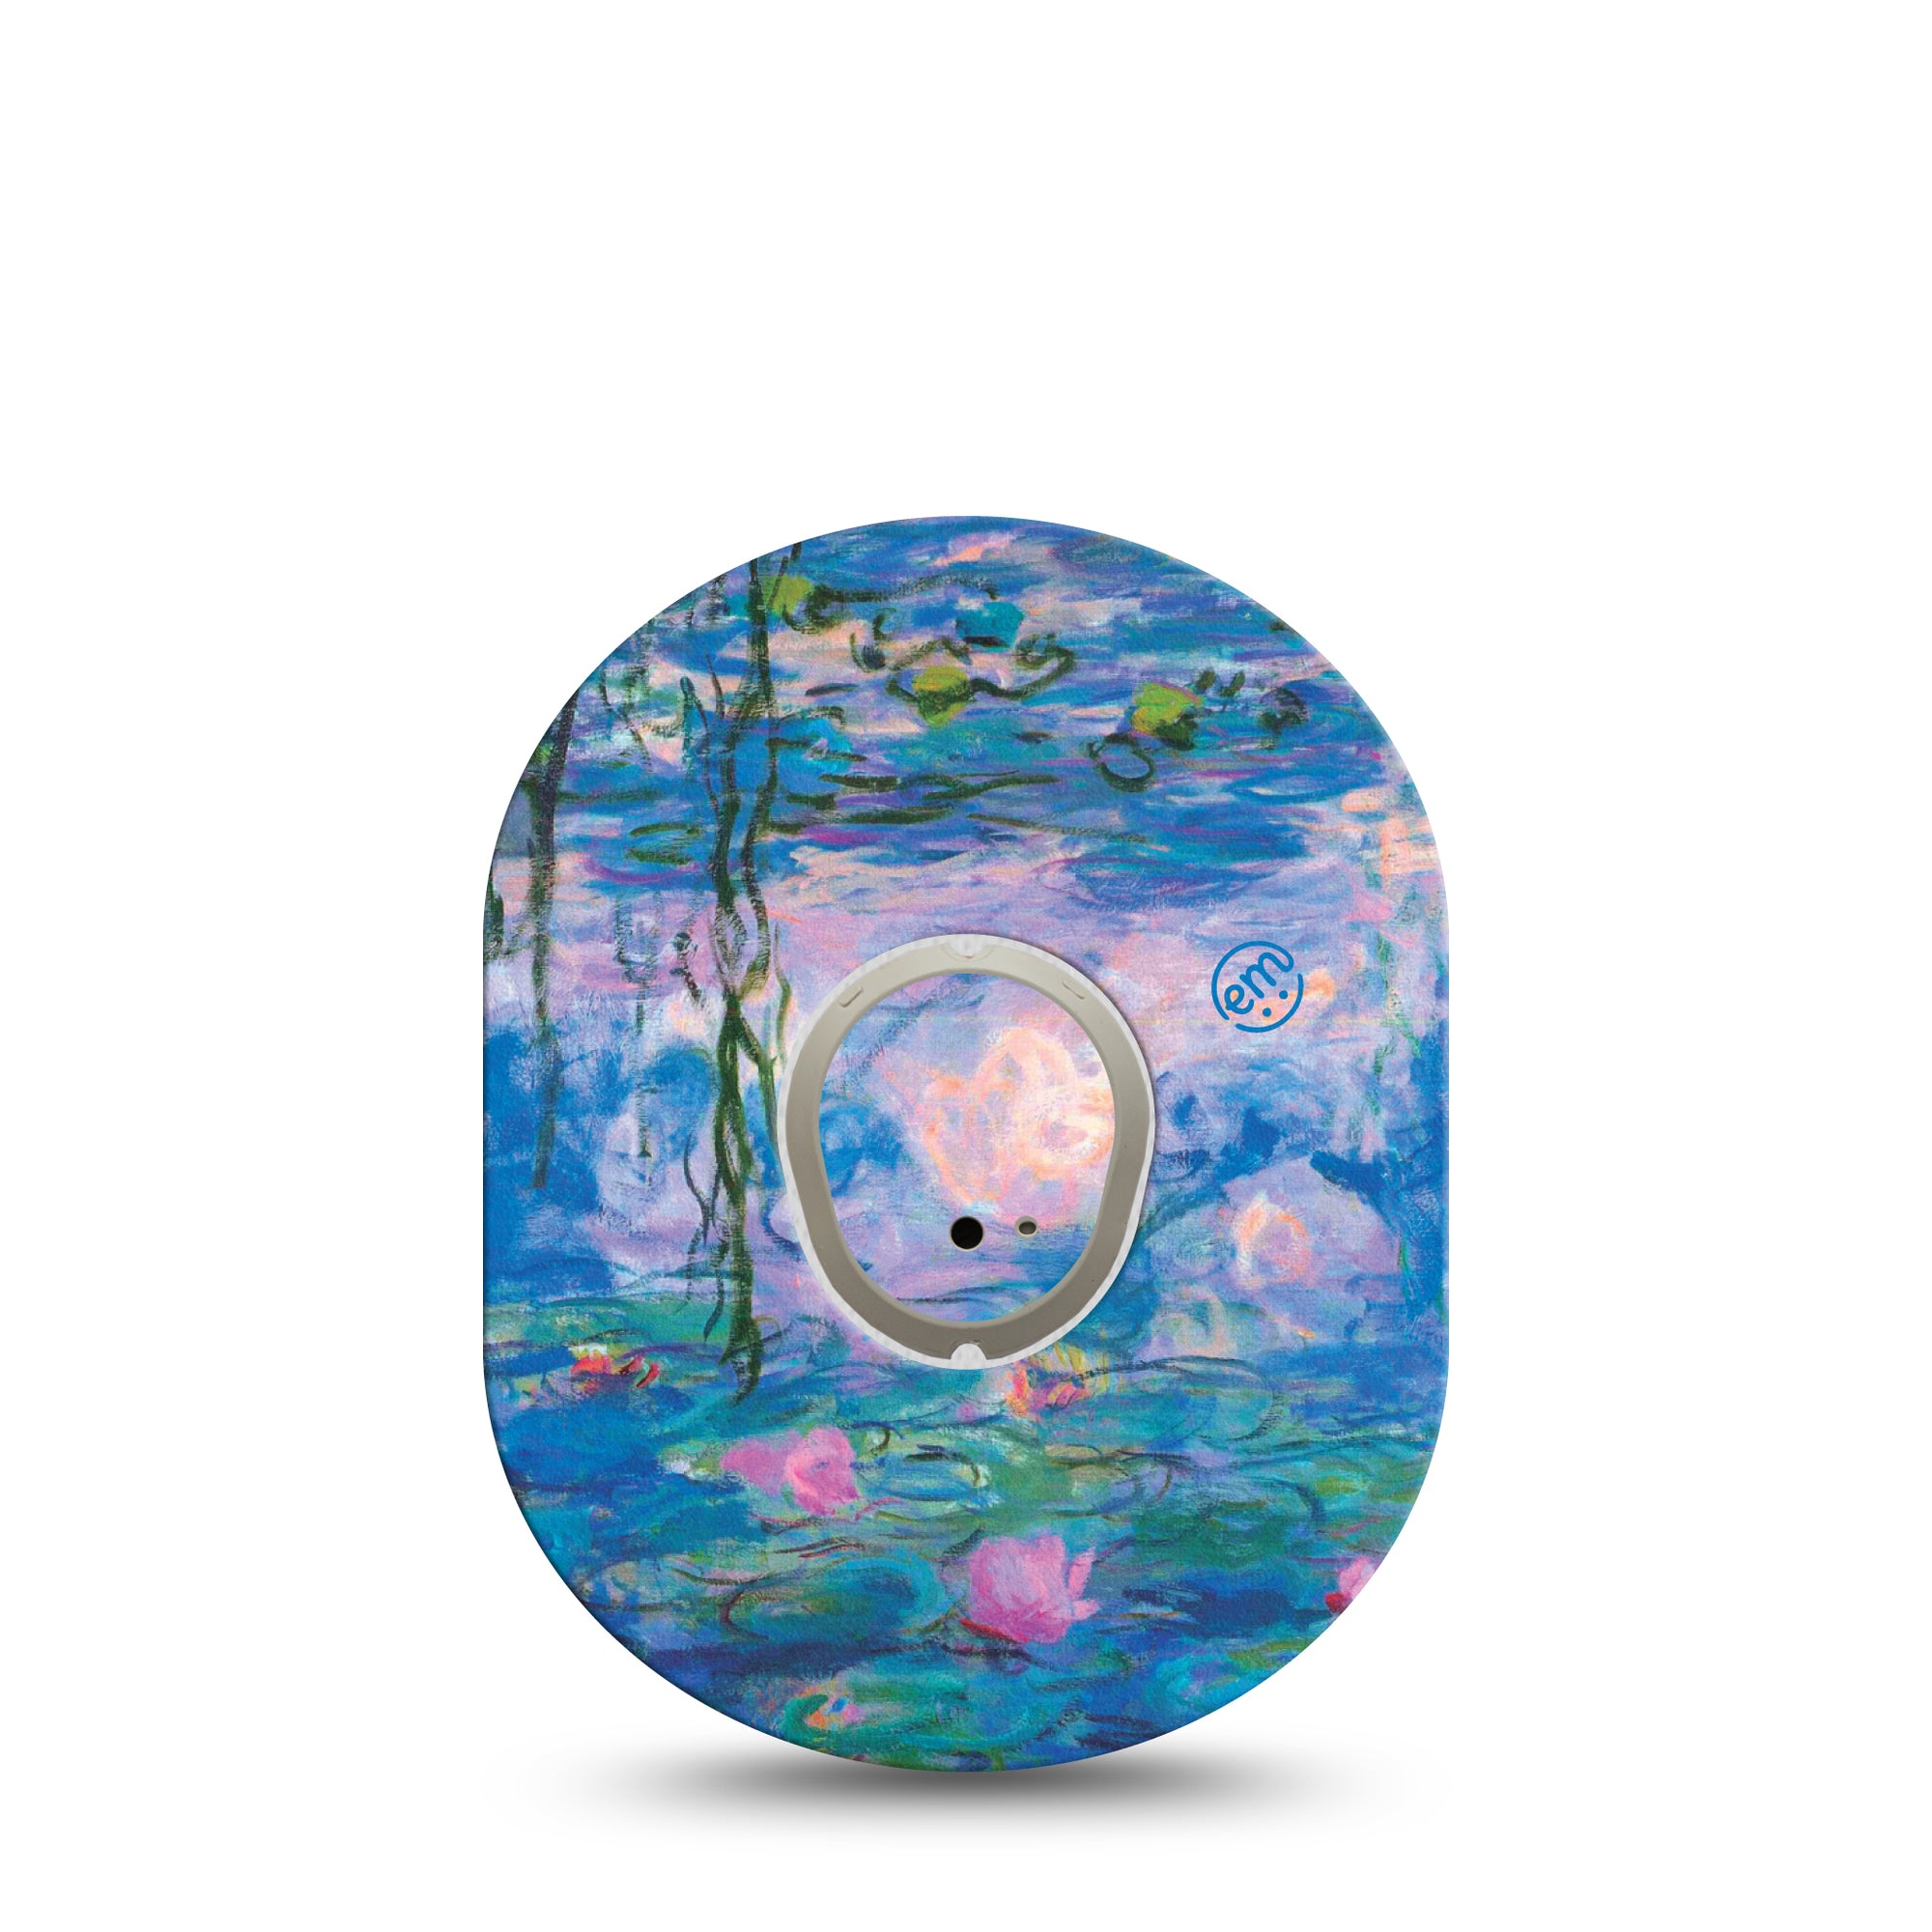 ExpressionMed Monet Water Lilies Dexcom G7 Transmitter Sticker, Single, Vinyl G7 Transmitter Sticker Painting of Water Lilies Inspired with Matching CGM Dexcom G7 Fixing Ring Adhesive Patch Tape